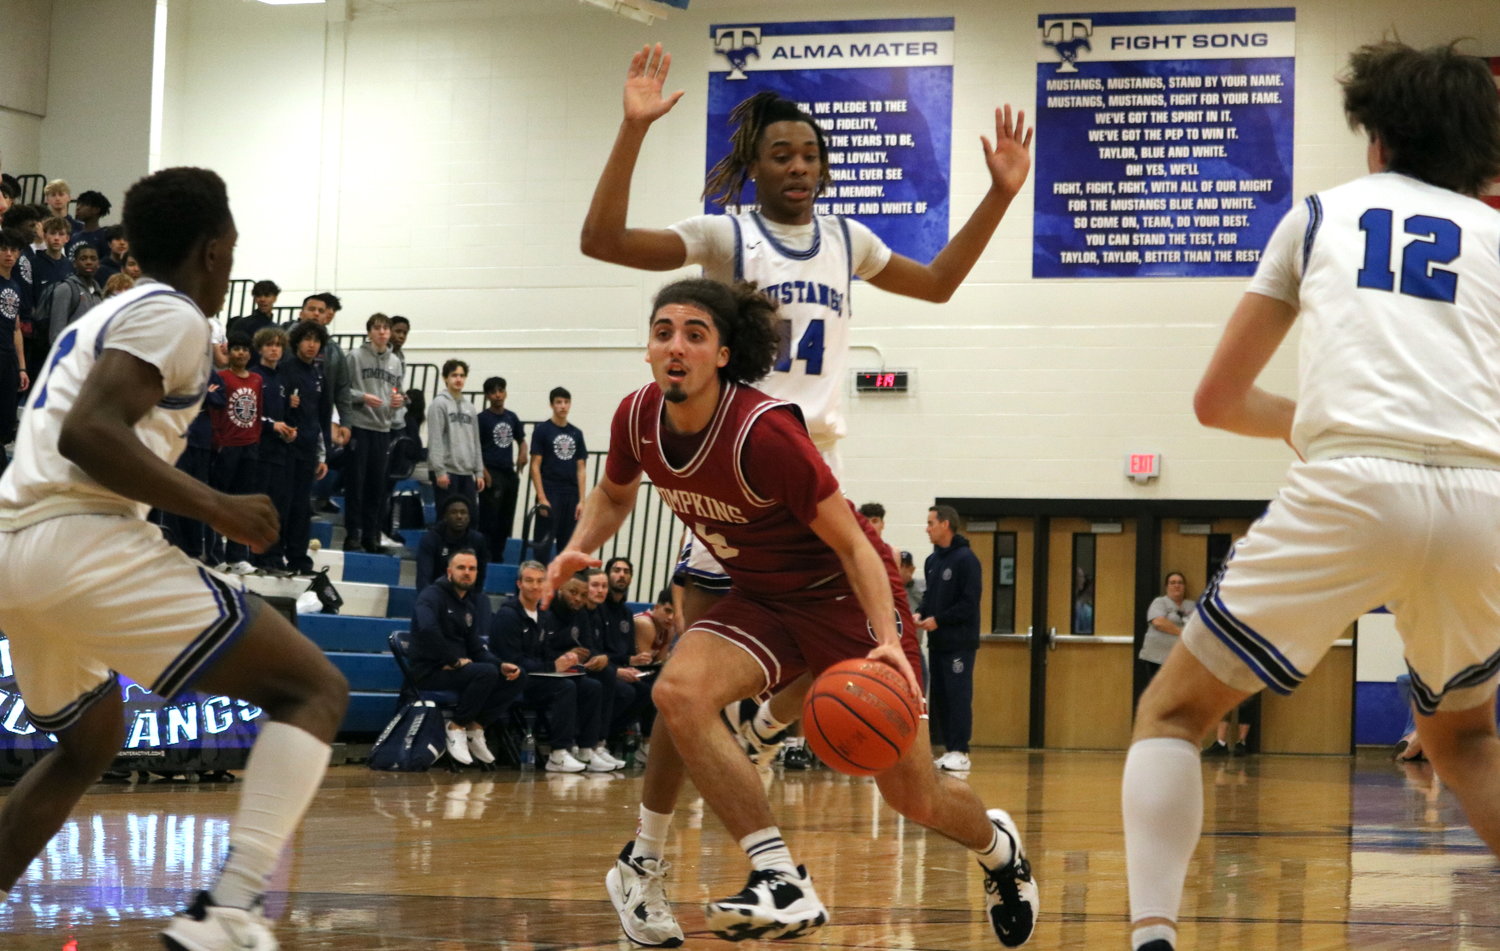 Luke Coughran dribbles through the Taylor defense during Saturday's game between Tompkins and Taylor at the Taylor gym.